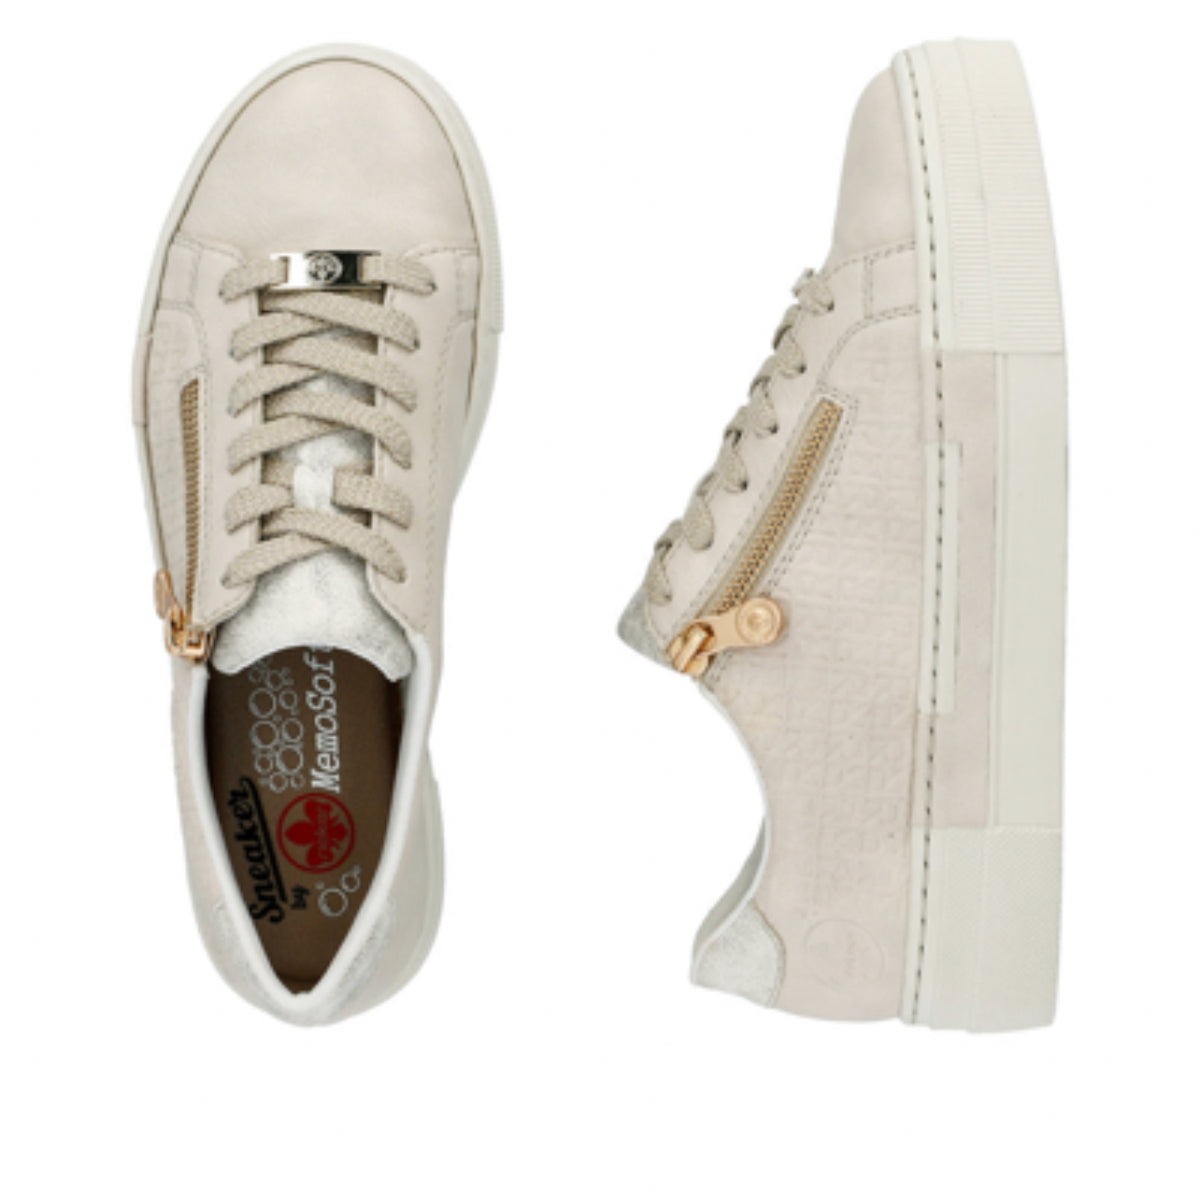 Rieker - N4914 Cream Trainer with a Gold Zip